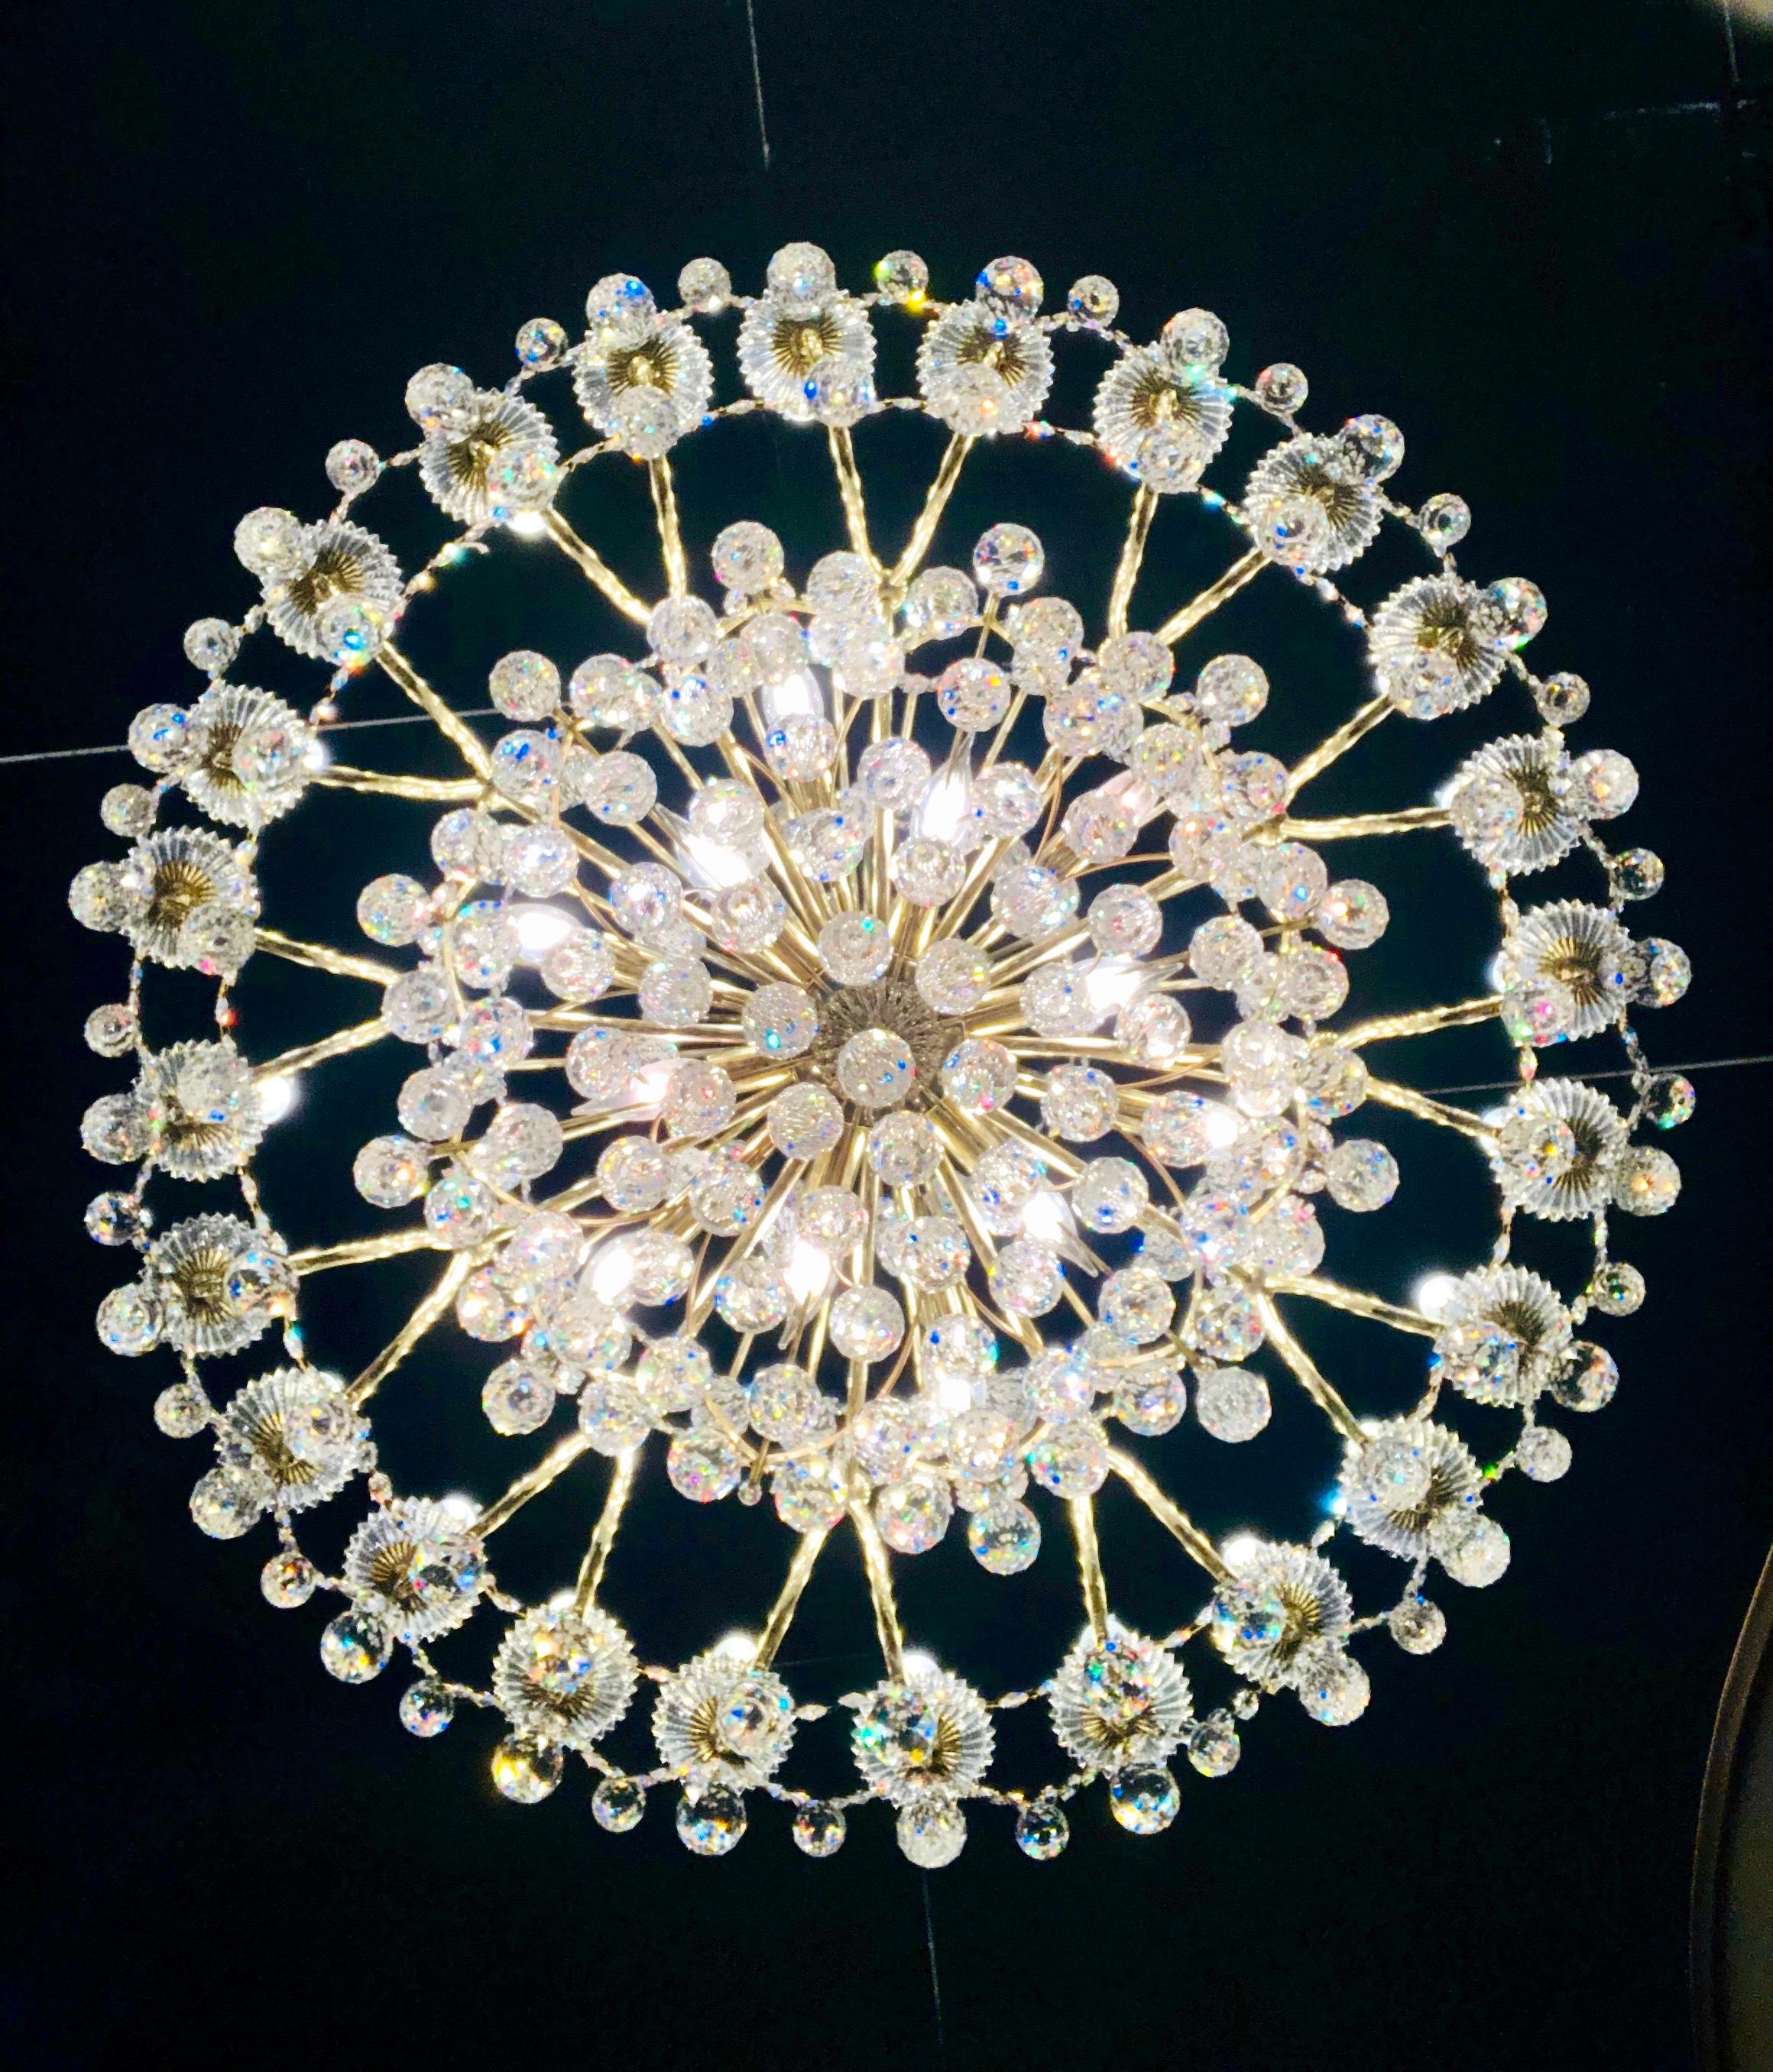 From a mansion estate, this Schonbek Contessa 36 light chandelier with a gold finish metal frame blossoms like a rare flower, with a graceful, hand-formed crystal body and a kaleidoscope of dense crystal ornaments. Chandelier features 24 candle